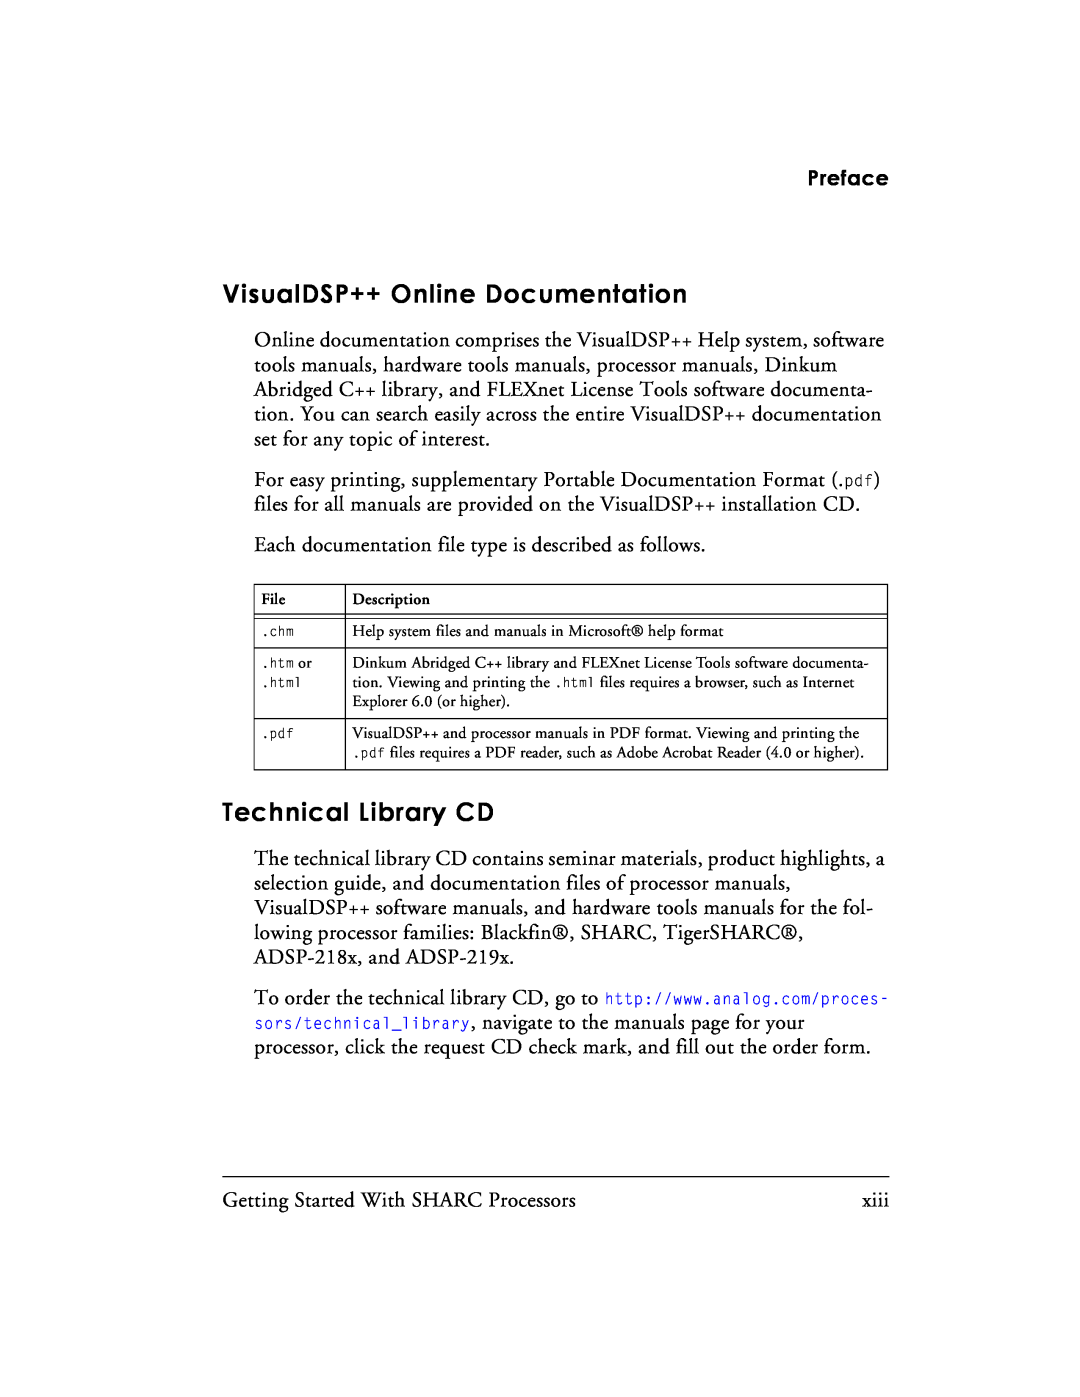 Analog Devices 82-003536-01 manual VisualDSP++ Online Documentation, Technical Library CD, Preface 